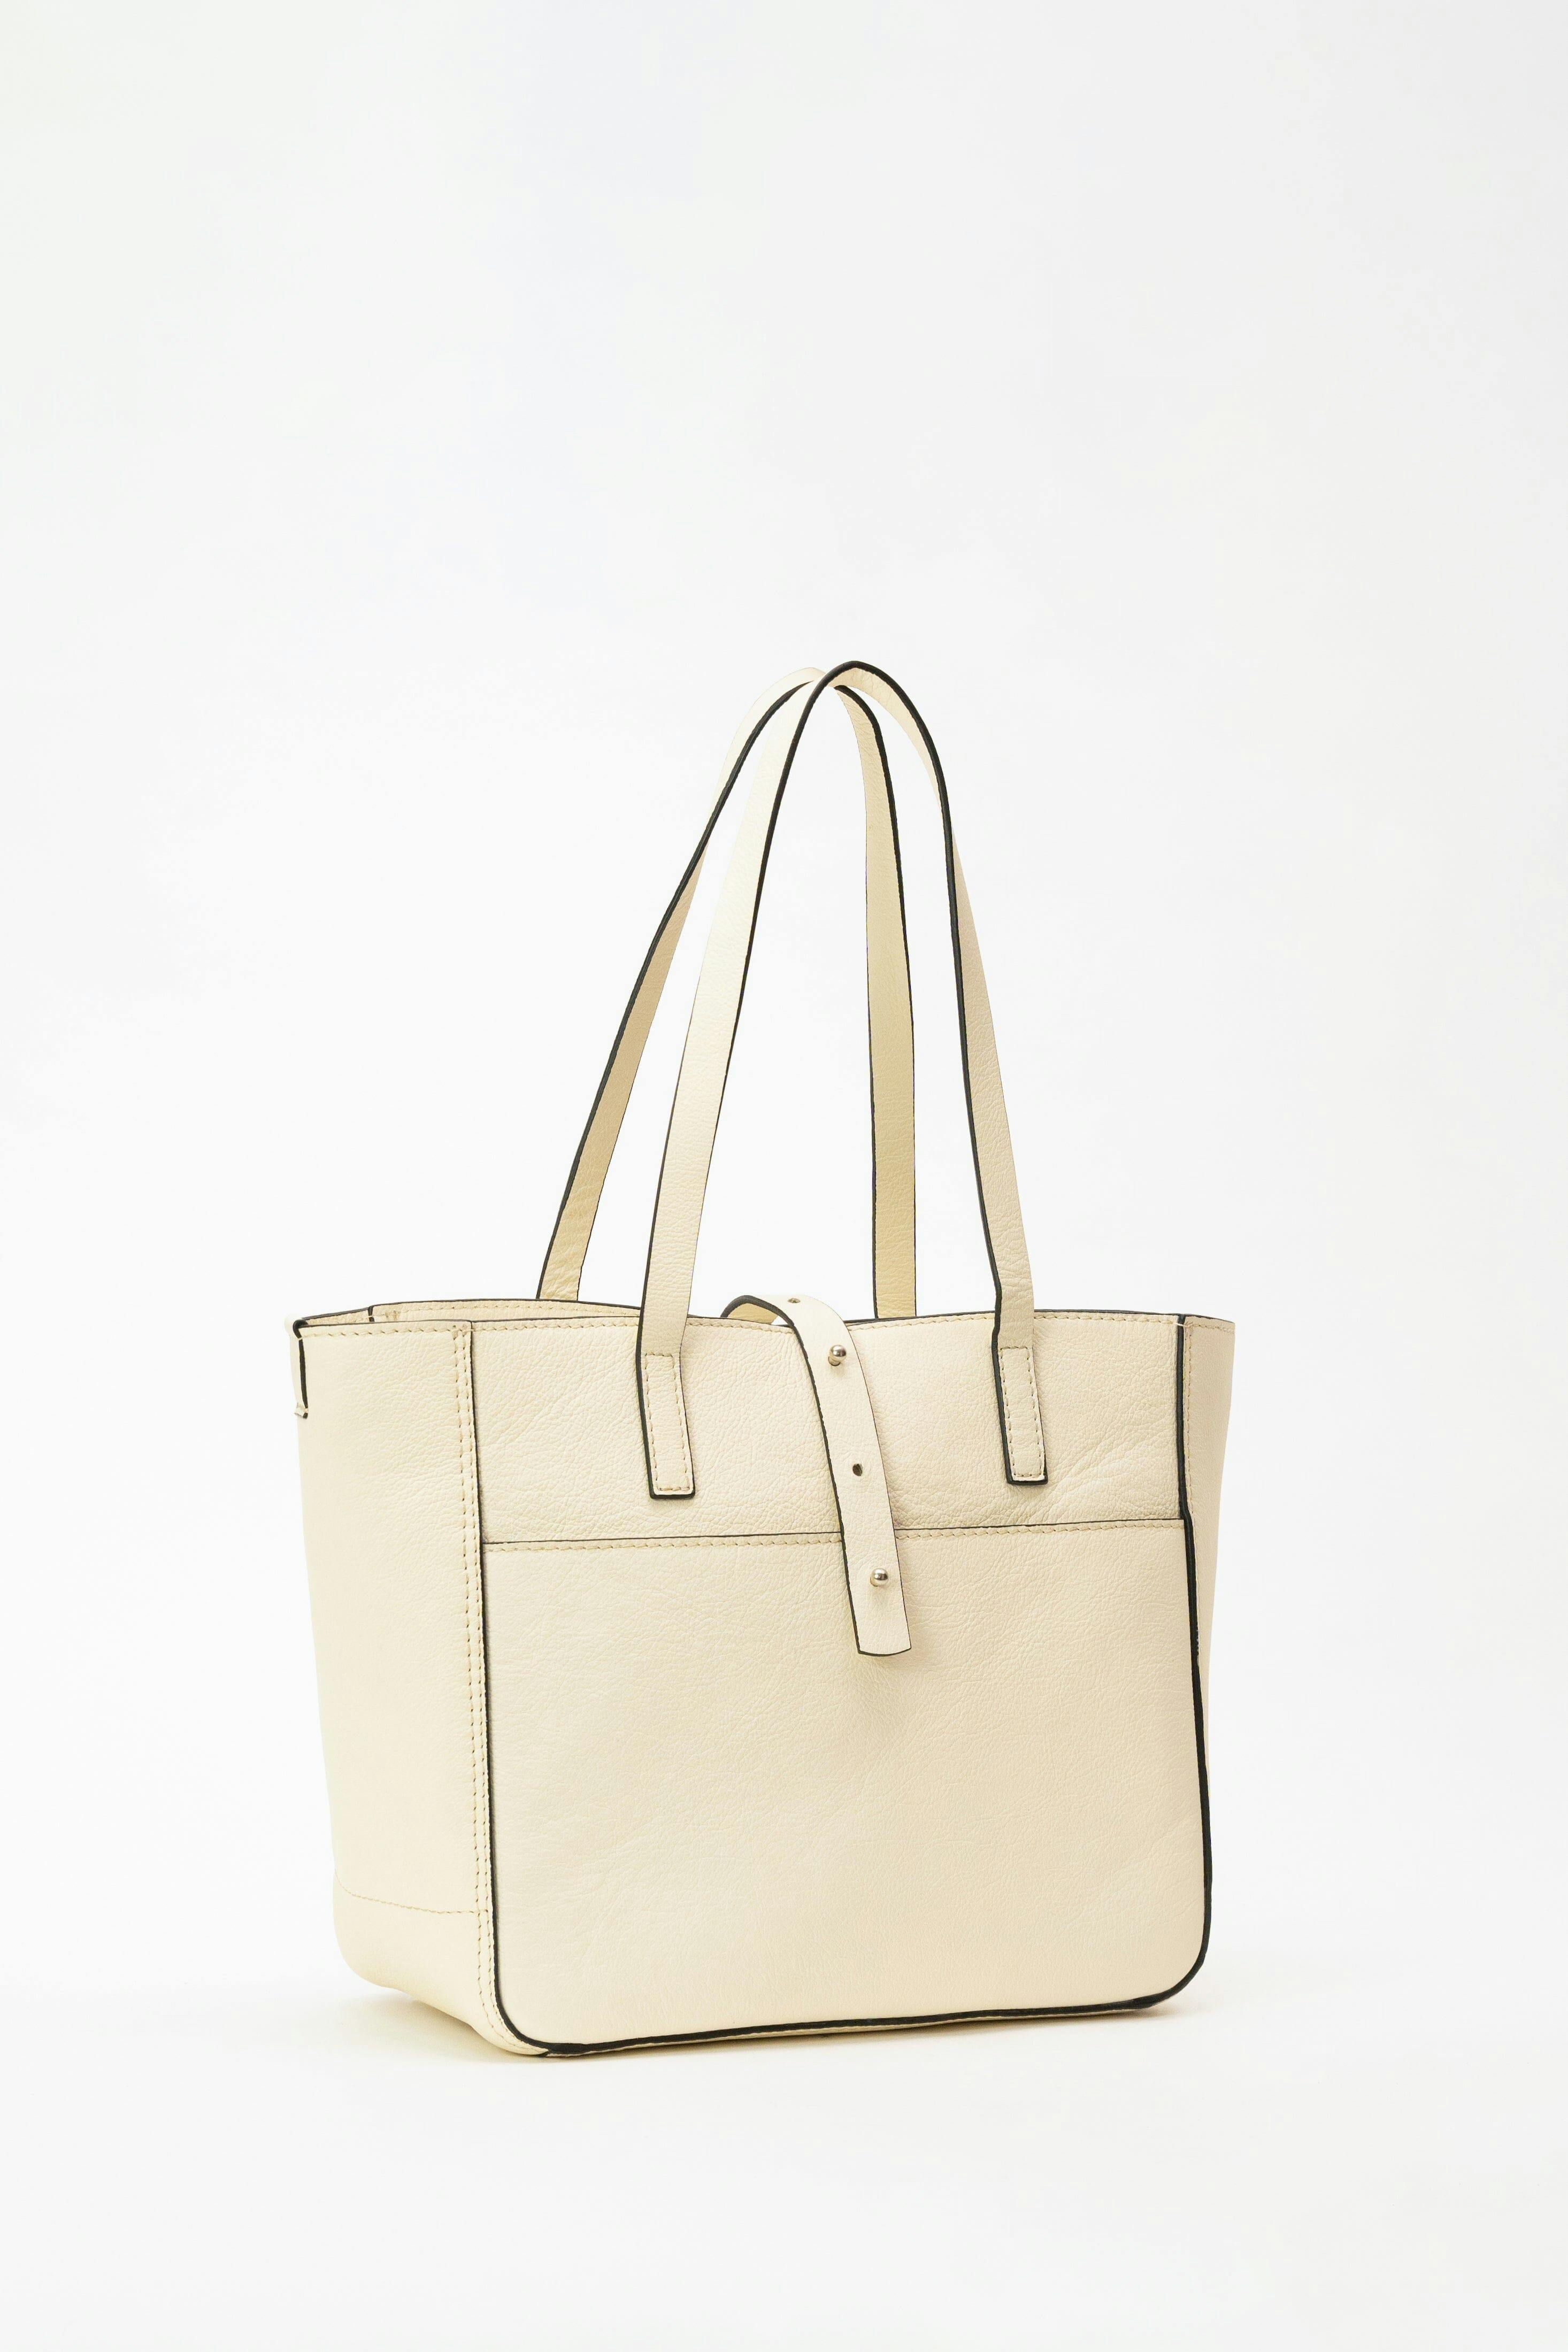 Decker shoulder bag in off-white, a product by Mistry 